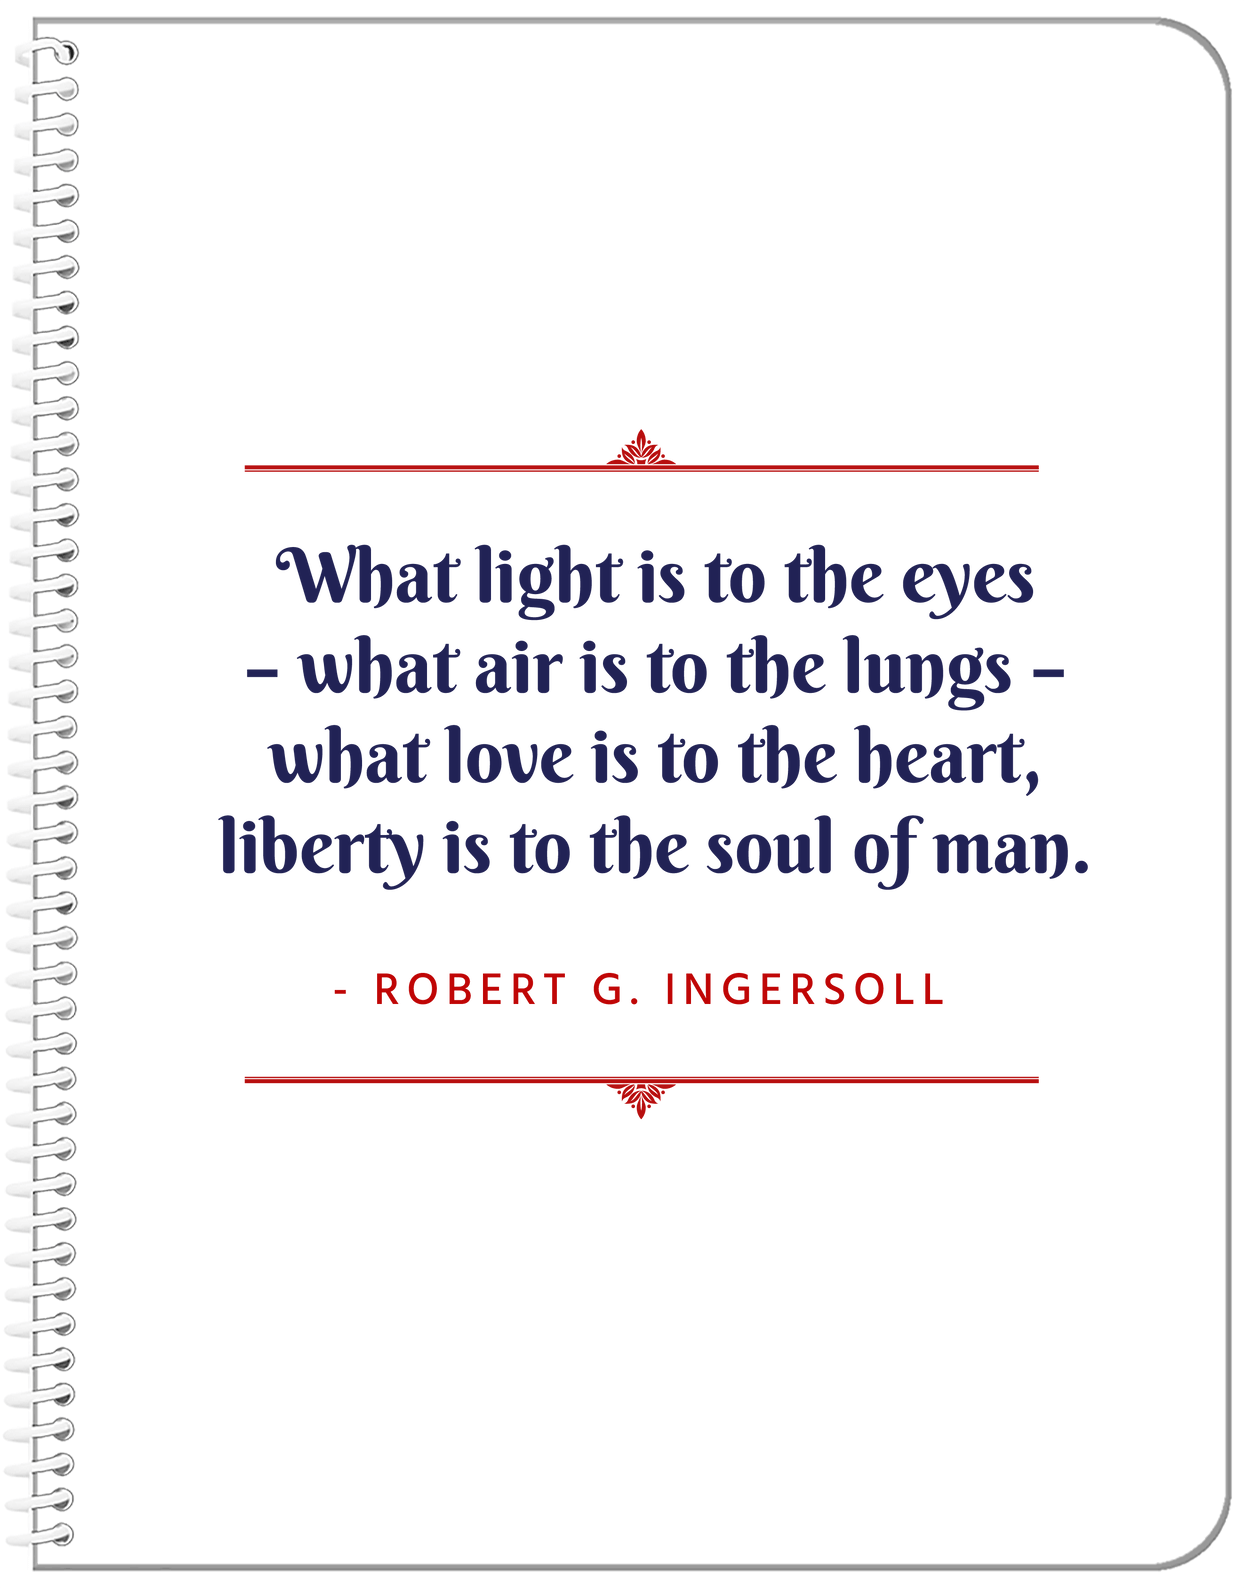 Famous Quotes Notebook - Robert Ingersoll - Front View